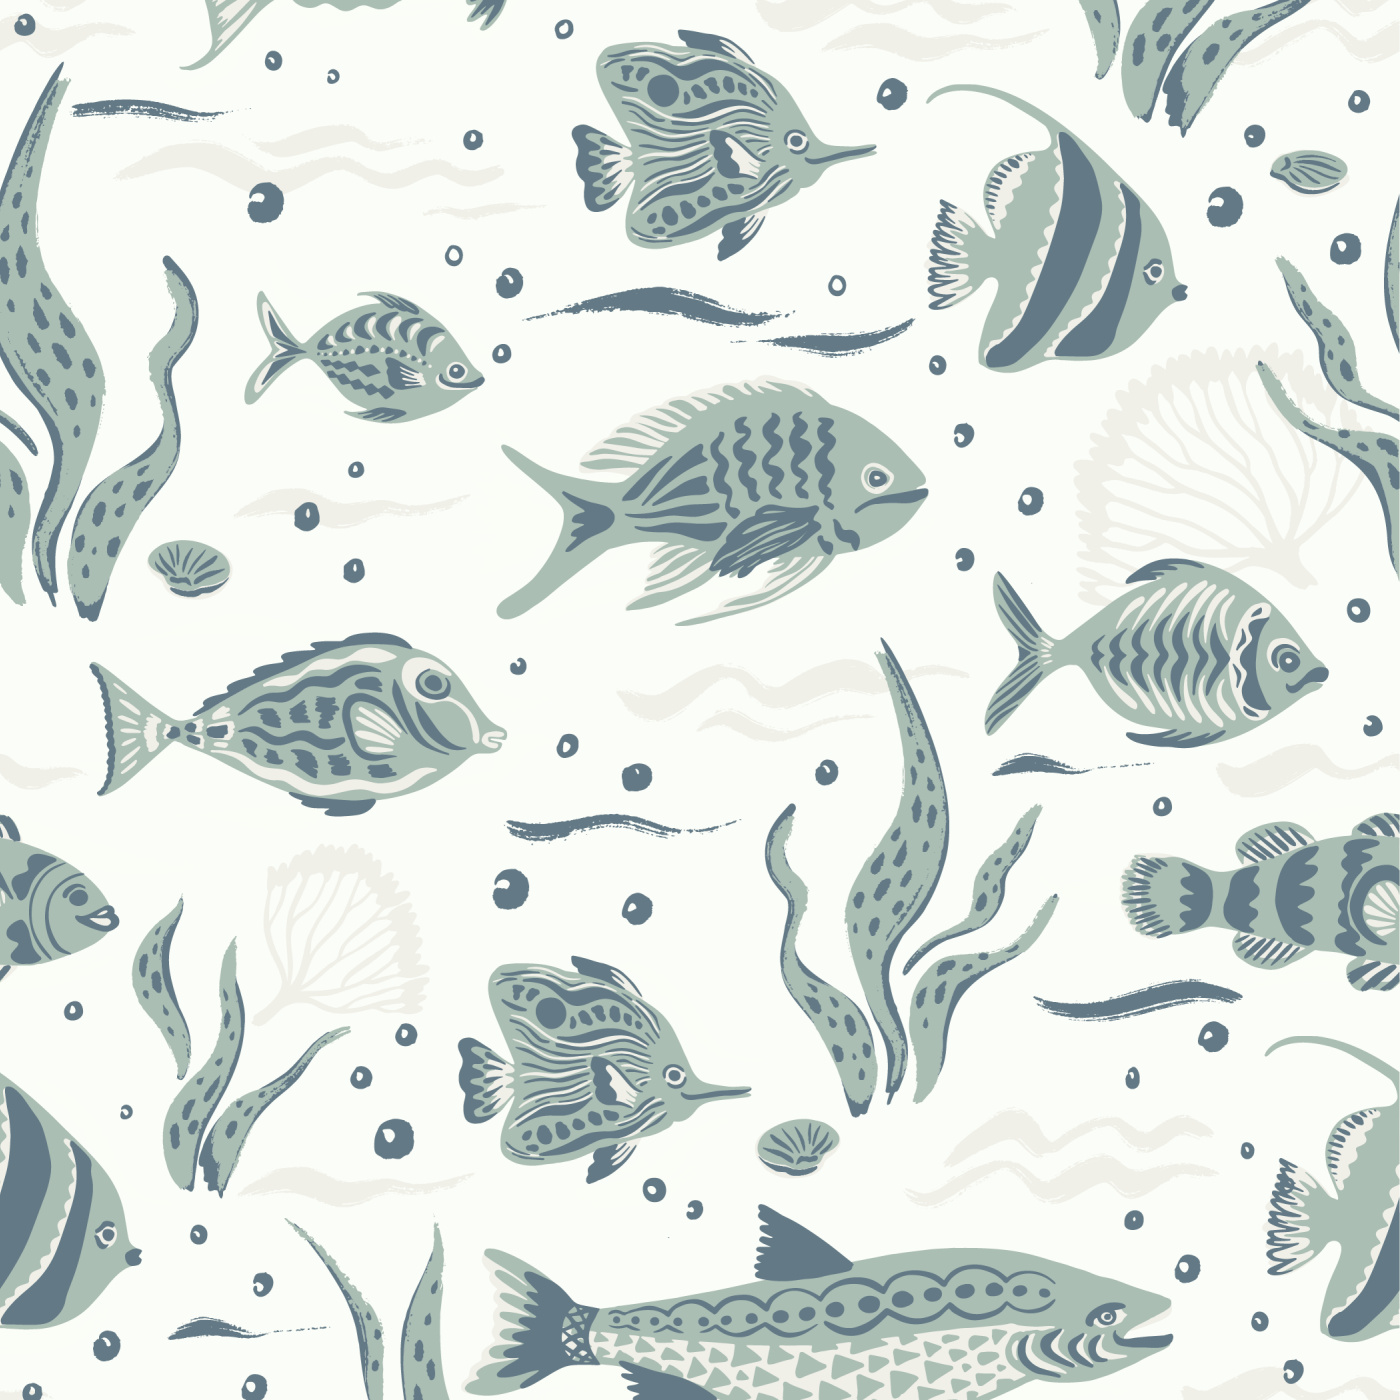 Fun Fish Peel And Stick Removable Wallpaper